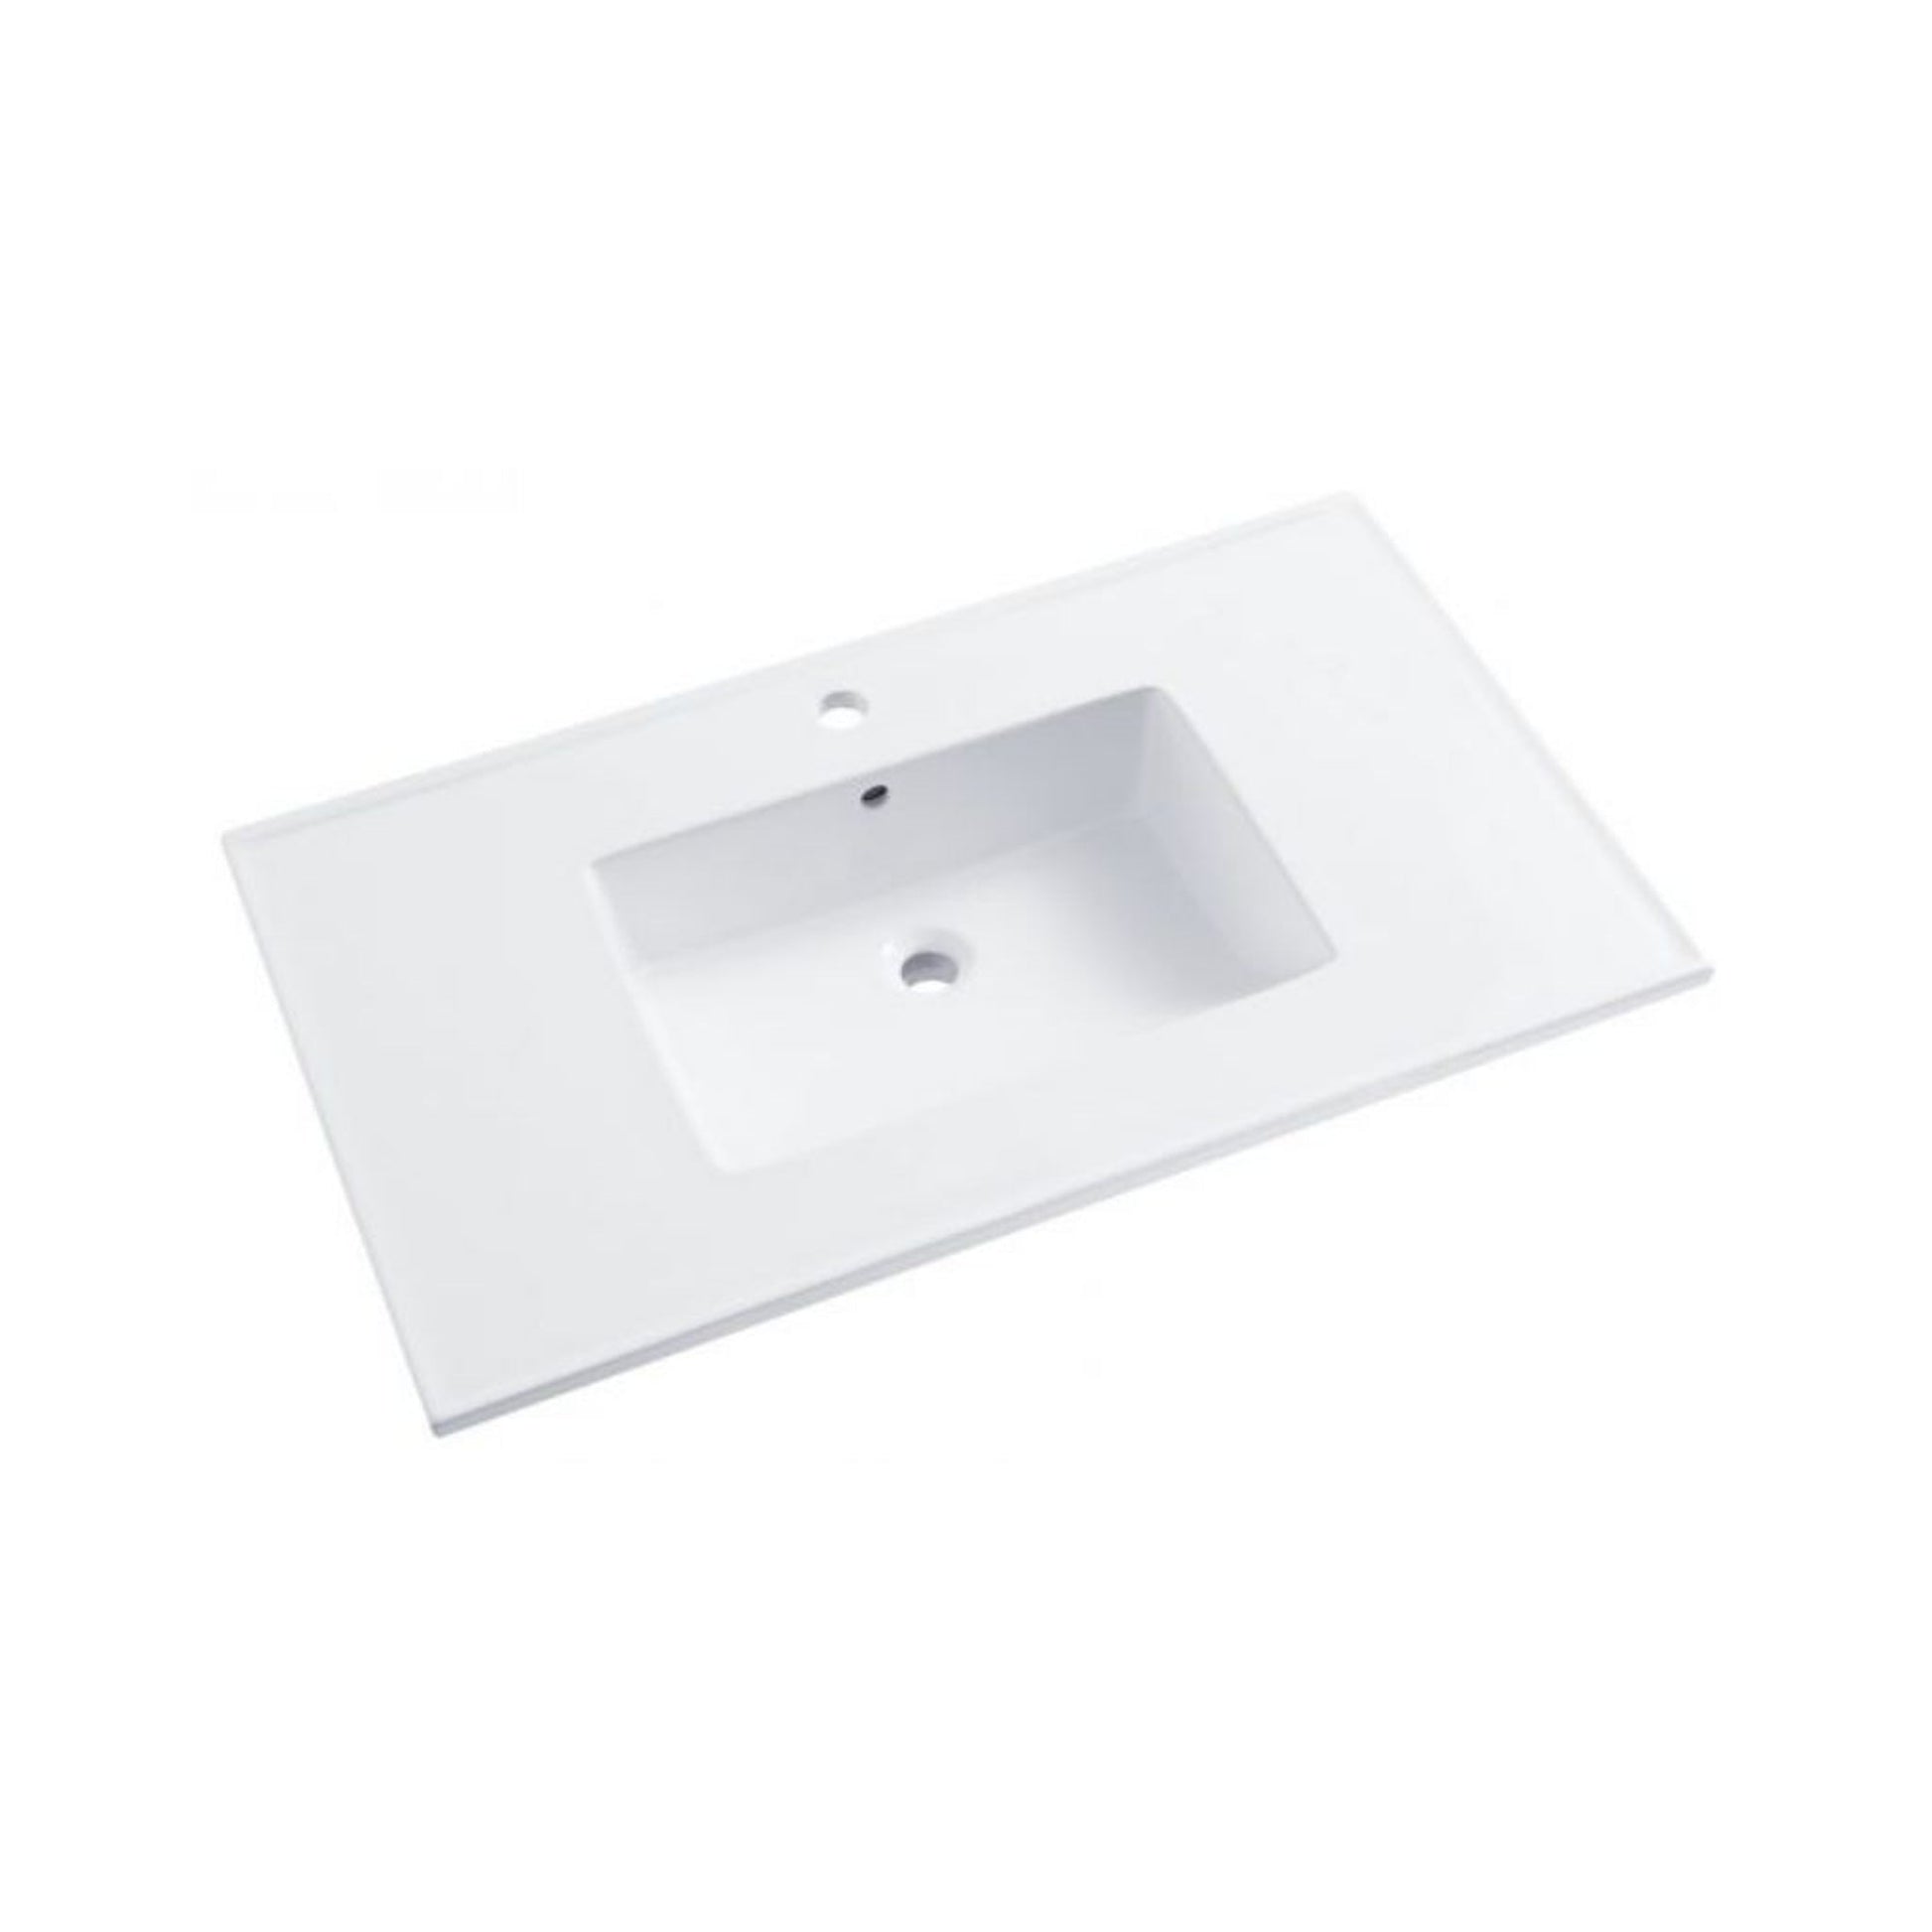 Ratel 31" x 22" White Ceramic Single Integrated Sink and Vanity Top